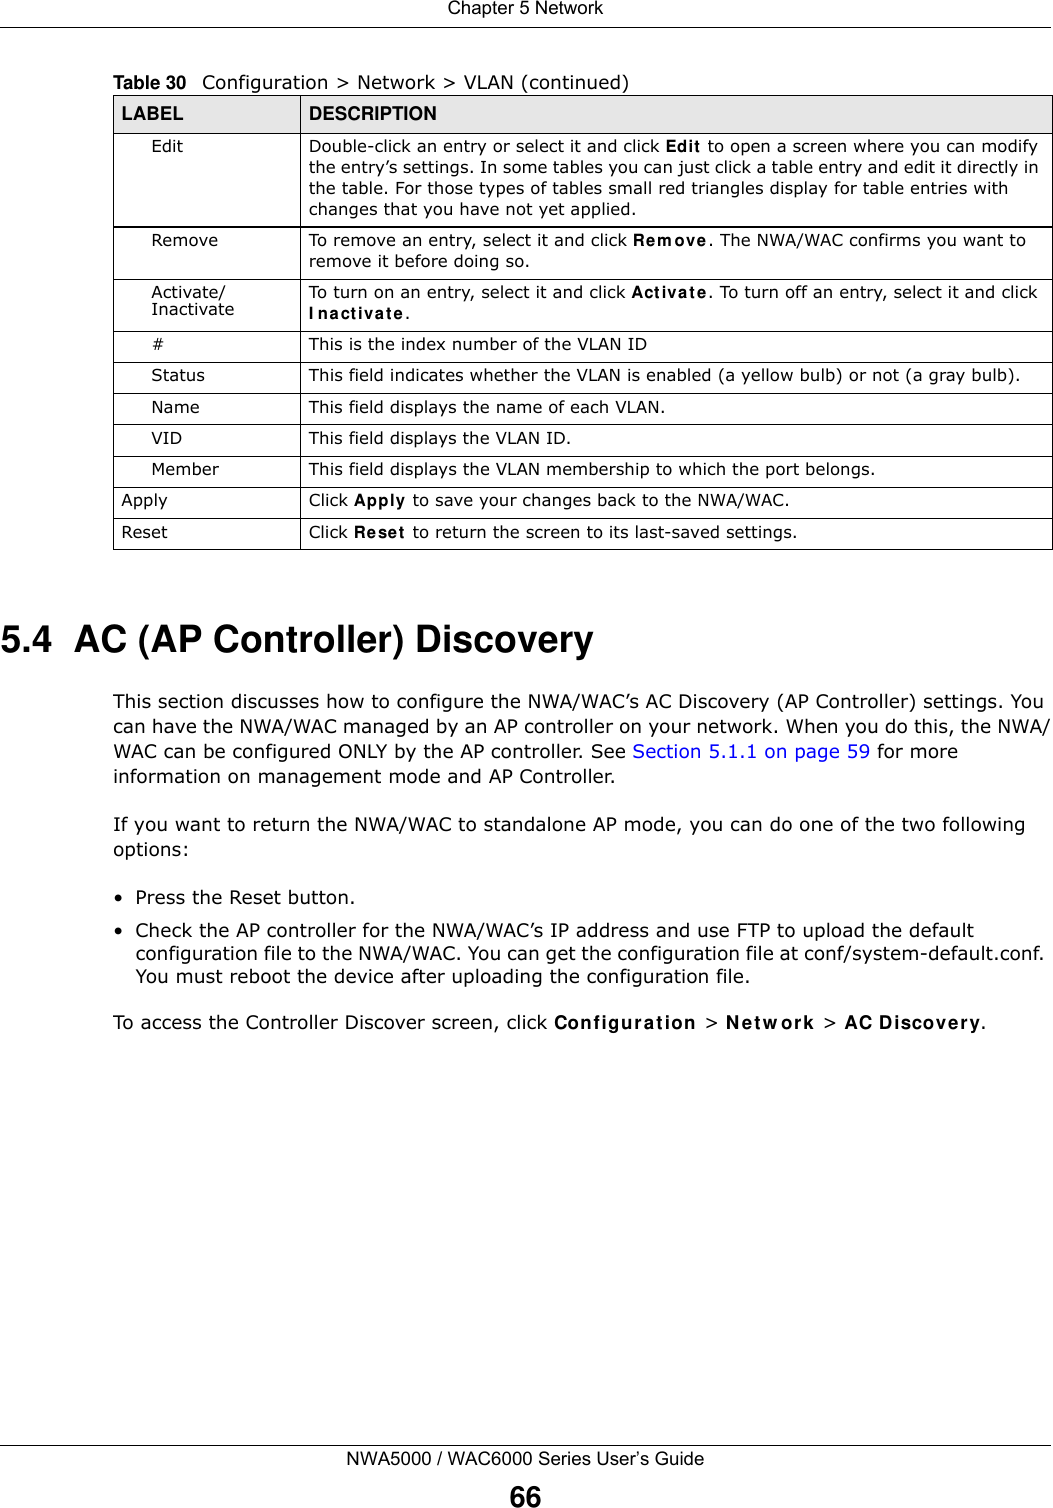 Chapter 5 NetworkNWA5000 / WAC6000 Series User’s Guide665.4  AC (AP Controller) DiscoveryThis section discusses how to configure the NWA/WAC’s AC Discovery (AP Controller) settings. You can have the NWA/WAC managed by an AP controller on your network. When you do this, the NWA/WAC can be configured ONLY by the AP controller. See Section 5.1.1 on page 59 for more information on management mode and AP Controller.If you want to return the NWA/WAC to standalone AP mode, you can do one of the two following options: • Press the Reset button.• Check the AP controller for the NWA/WAC’s IP address and use FTP to upload the default configuration file to the NWA/WAC. You can get the configuration file at conf/system-default.conf. You must reboot the device after uploading the configuration file. To access the Controller Discover screen, click Configu ra t ion &gt; N e t w ork  &gt; AC Discovery.Edit Double-click an entry or select it and click Edit  to open a screen where you can modify the entry’s settings. In some tables you can just click a table entry and edit it directly in the table. For those types of tables small red triangles display for table entries with changes that you have not yet applied.Remove To remove an entry, select it and click Rem ove. The NWA/WAC confirms you want to remove it before doing so.Activate/Inactivate To turn on an entry, select it and click Act iva t e . To turn off an entry, select it and click I n a ct iva t e .# This is the index number of the VLAN ID Status This field indicates whether the VLAN is enabled (a yellow bulb) or not (a gray bulb).Name This field displays the name of each VLAN.VID This field displays the VLAN ID.Member This field displays the VLAN membership to which the port belongs.Apply Click Apply to save your changes back to the NWA/WAC.Reset Click Re se t  to return the screen to its last-saved settings. Table 30   Configuration &gt; Network &gt; VLAN (continued)LABEL  DESCRIPTION